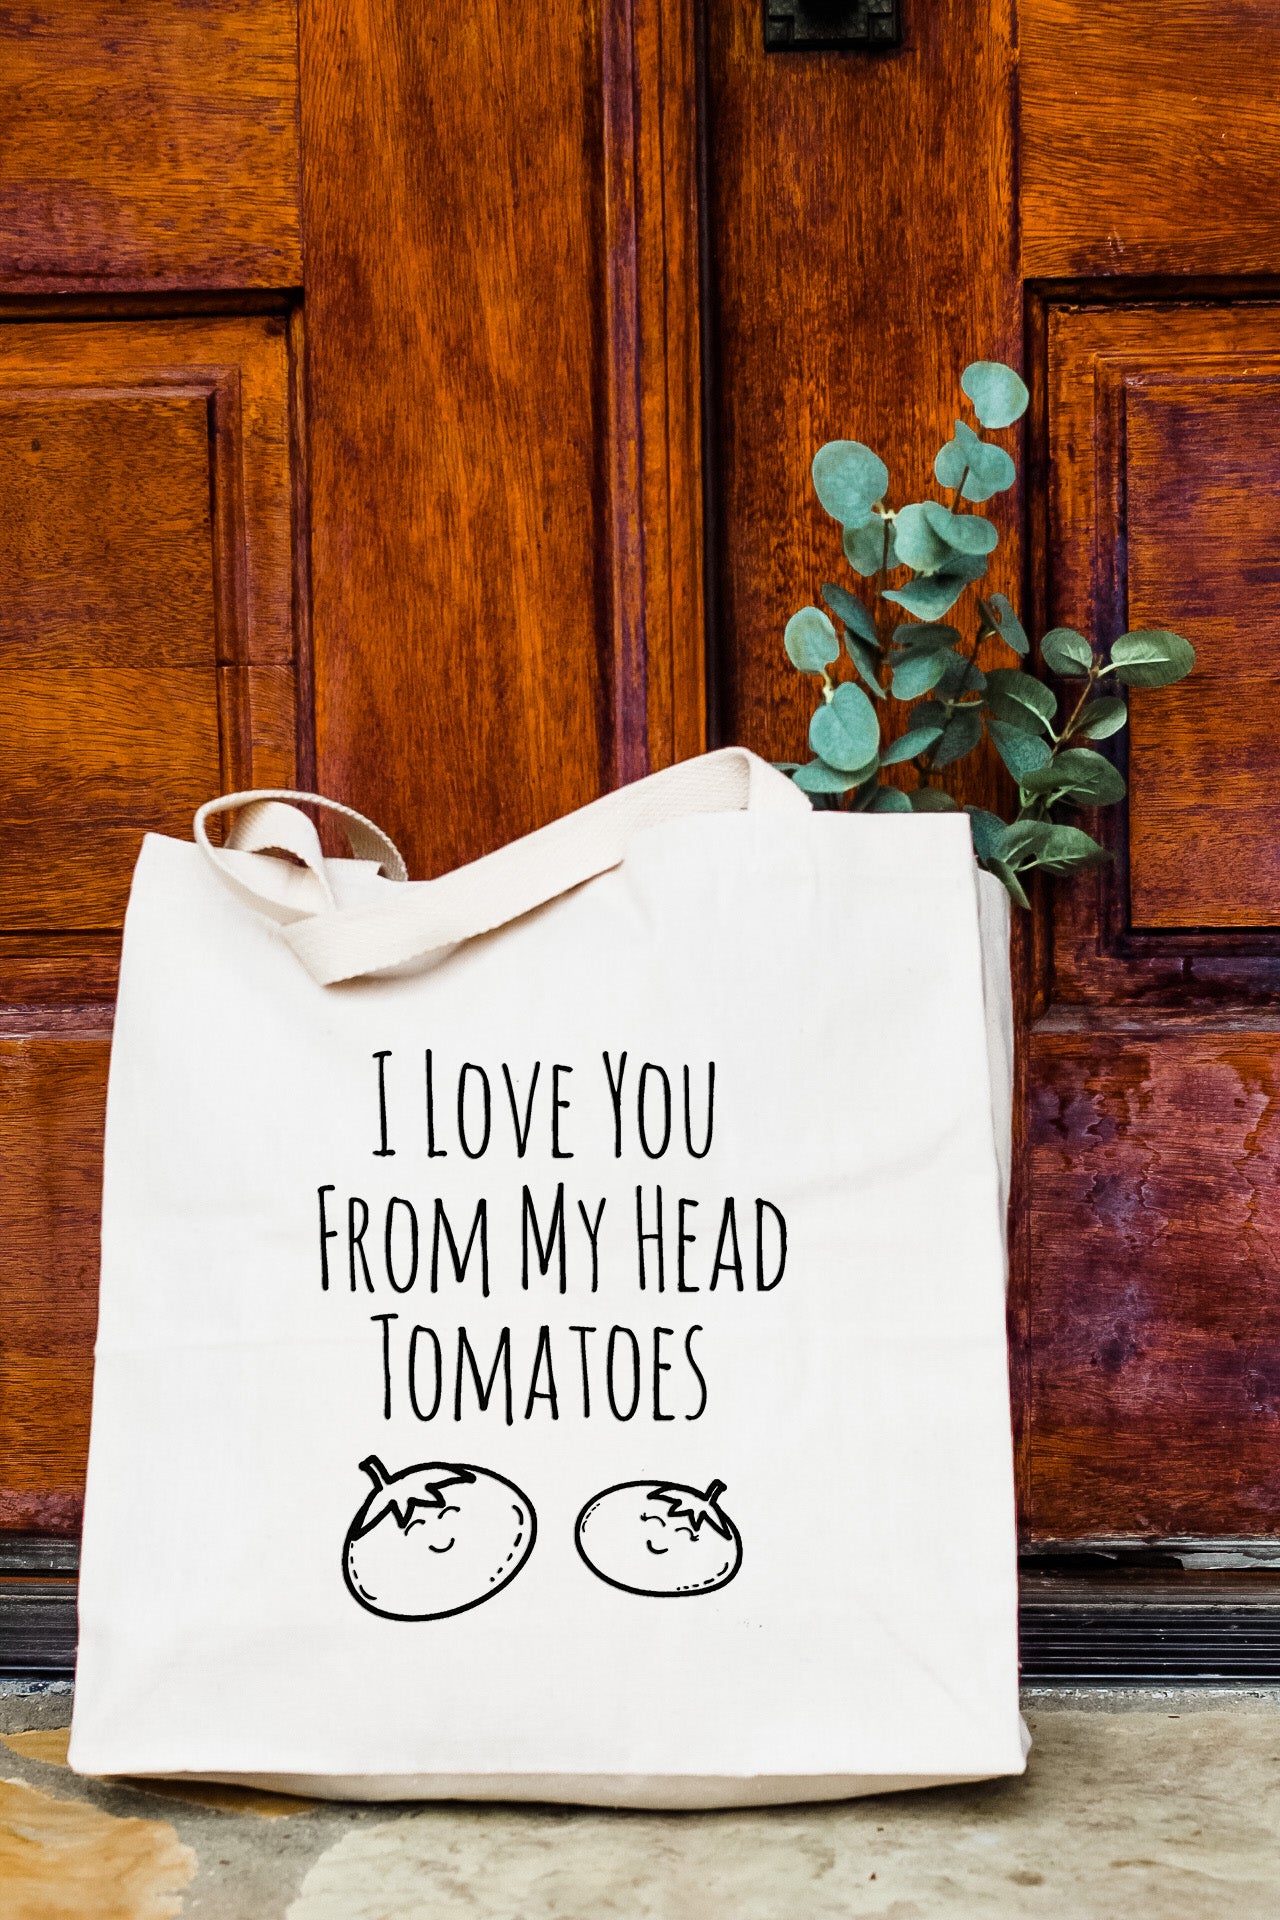 I Love You From My Head Tomatoes - Tote Bag - MoonlightMakers